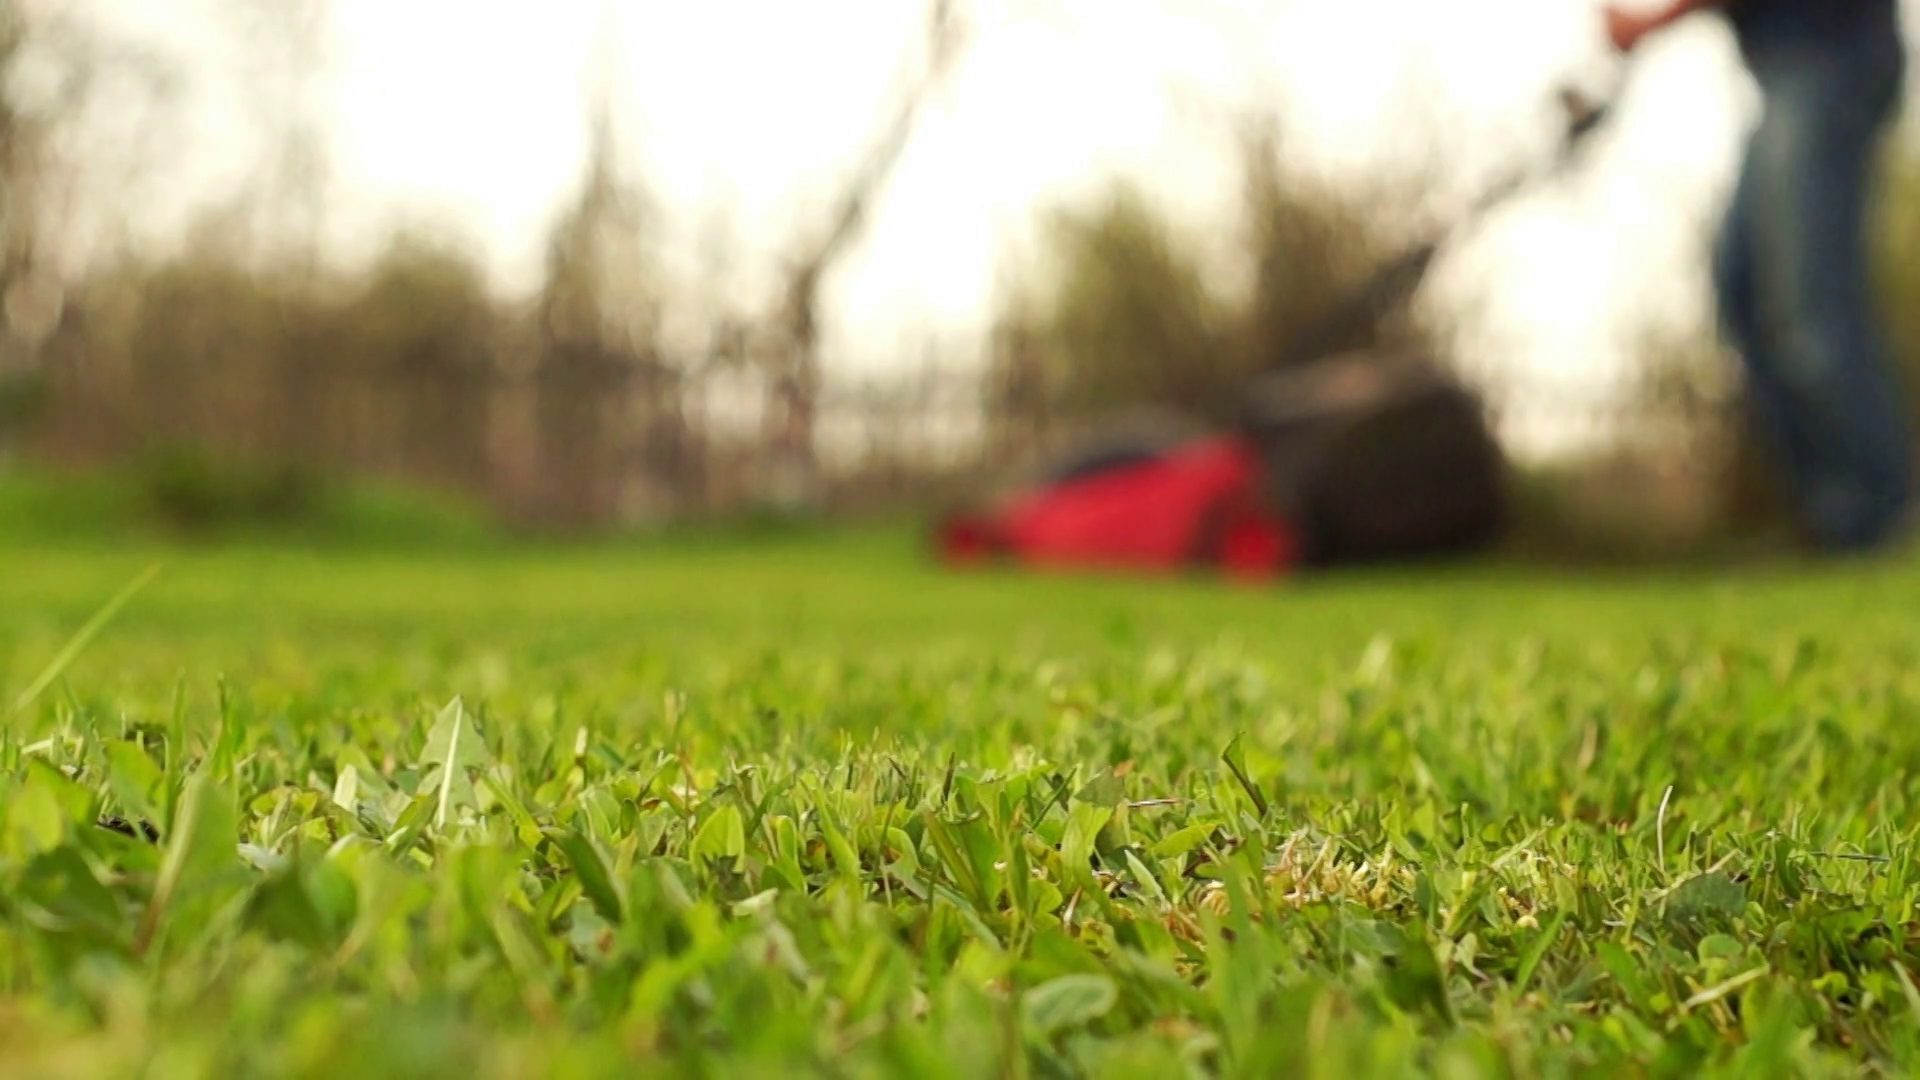 Man Mowing Grass In The Blurred Background Stock